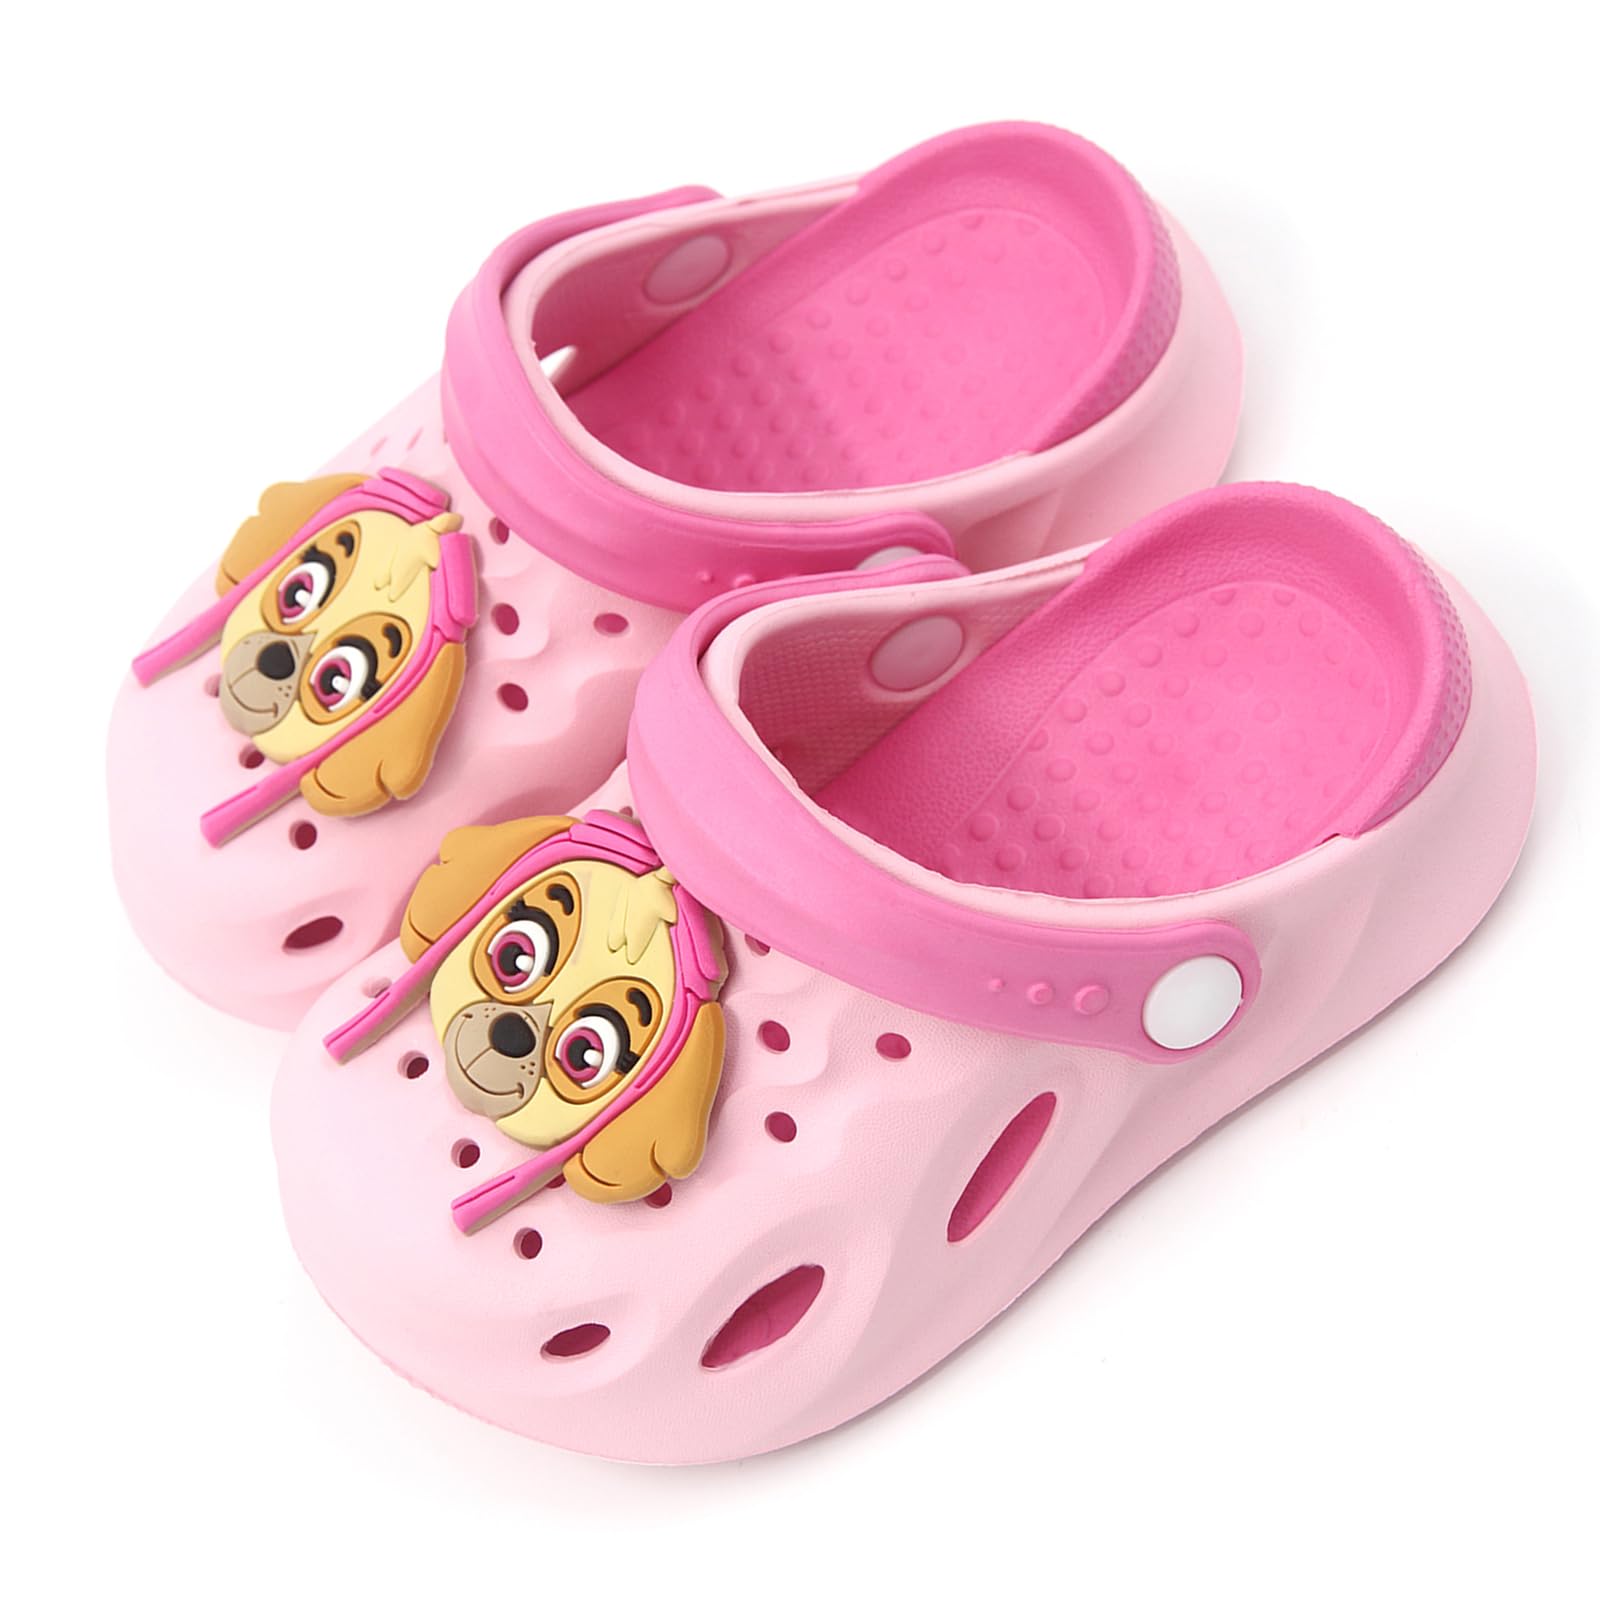 Yesfrog Kids Clogs Cute Garden Shoes Beach Non-Slip Slippers Indoor Outdoor Pool Shower for Boys Girls